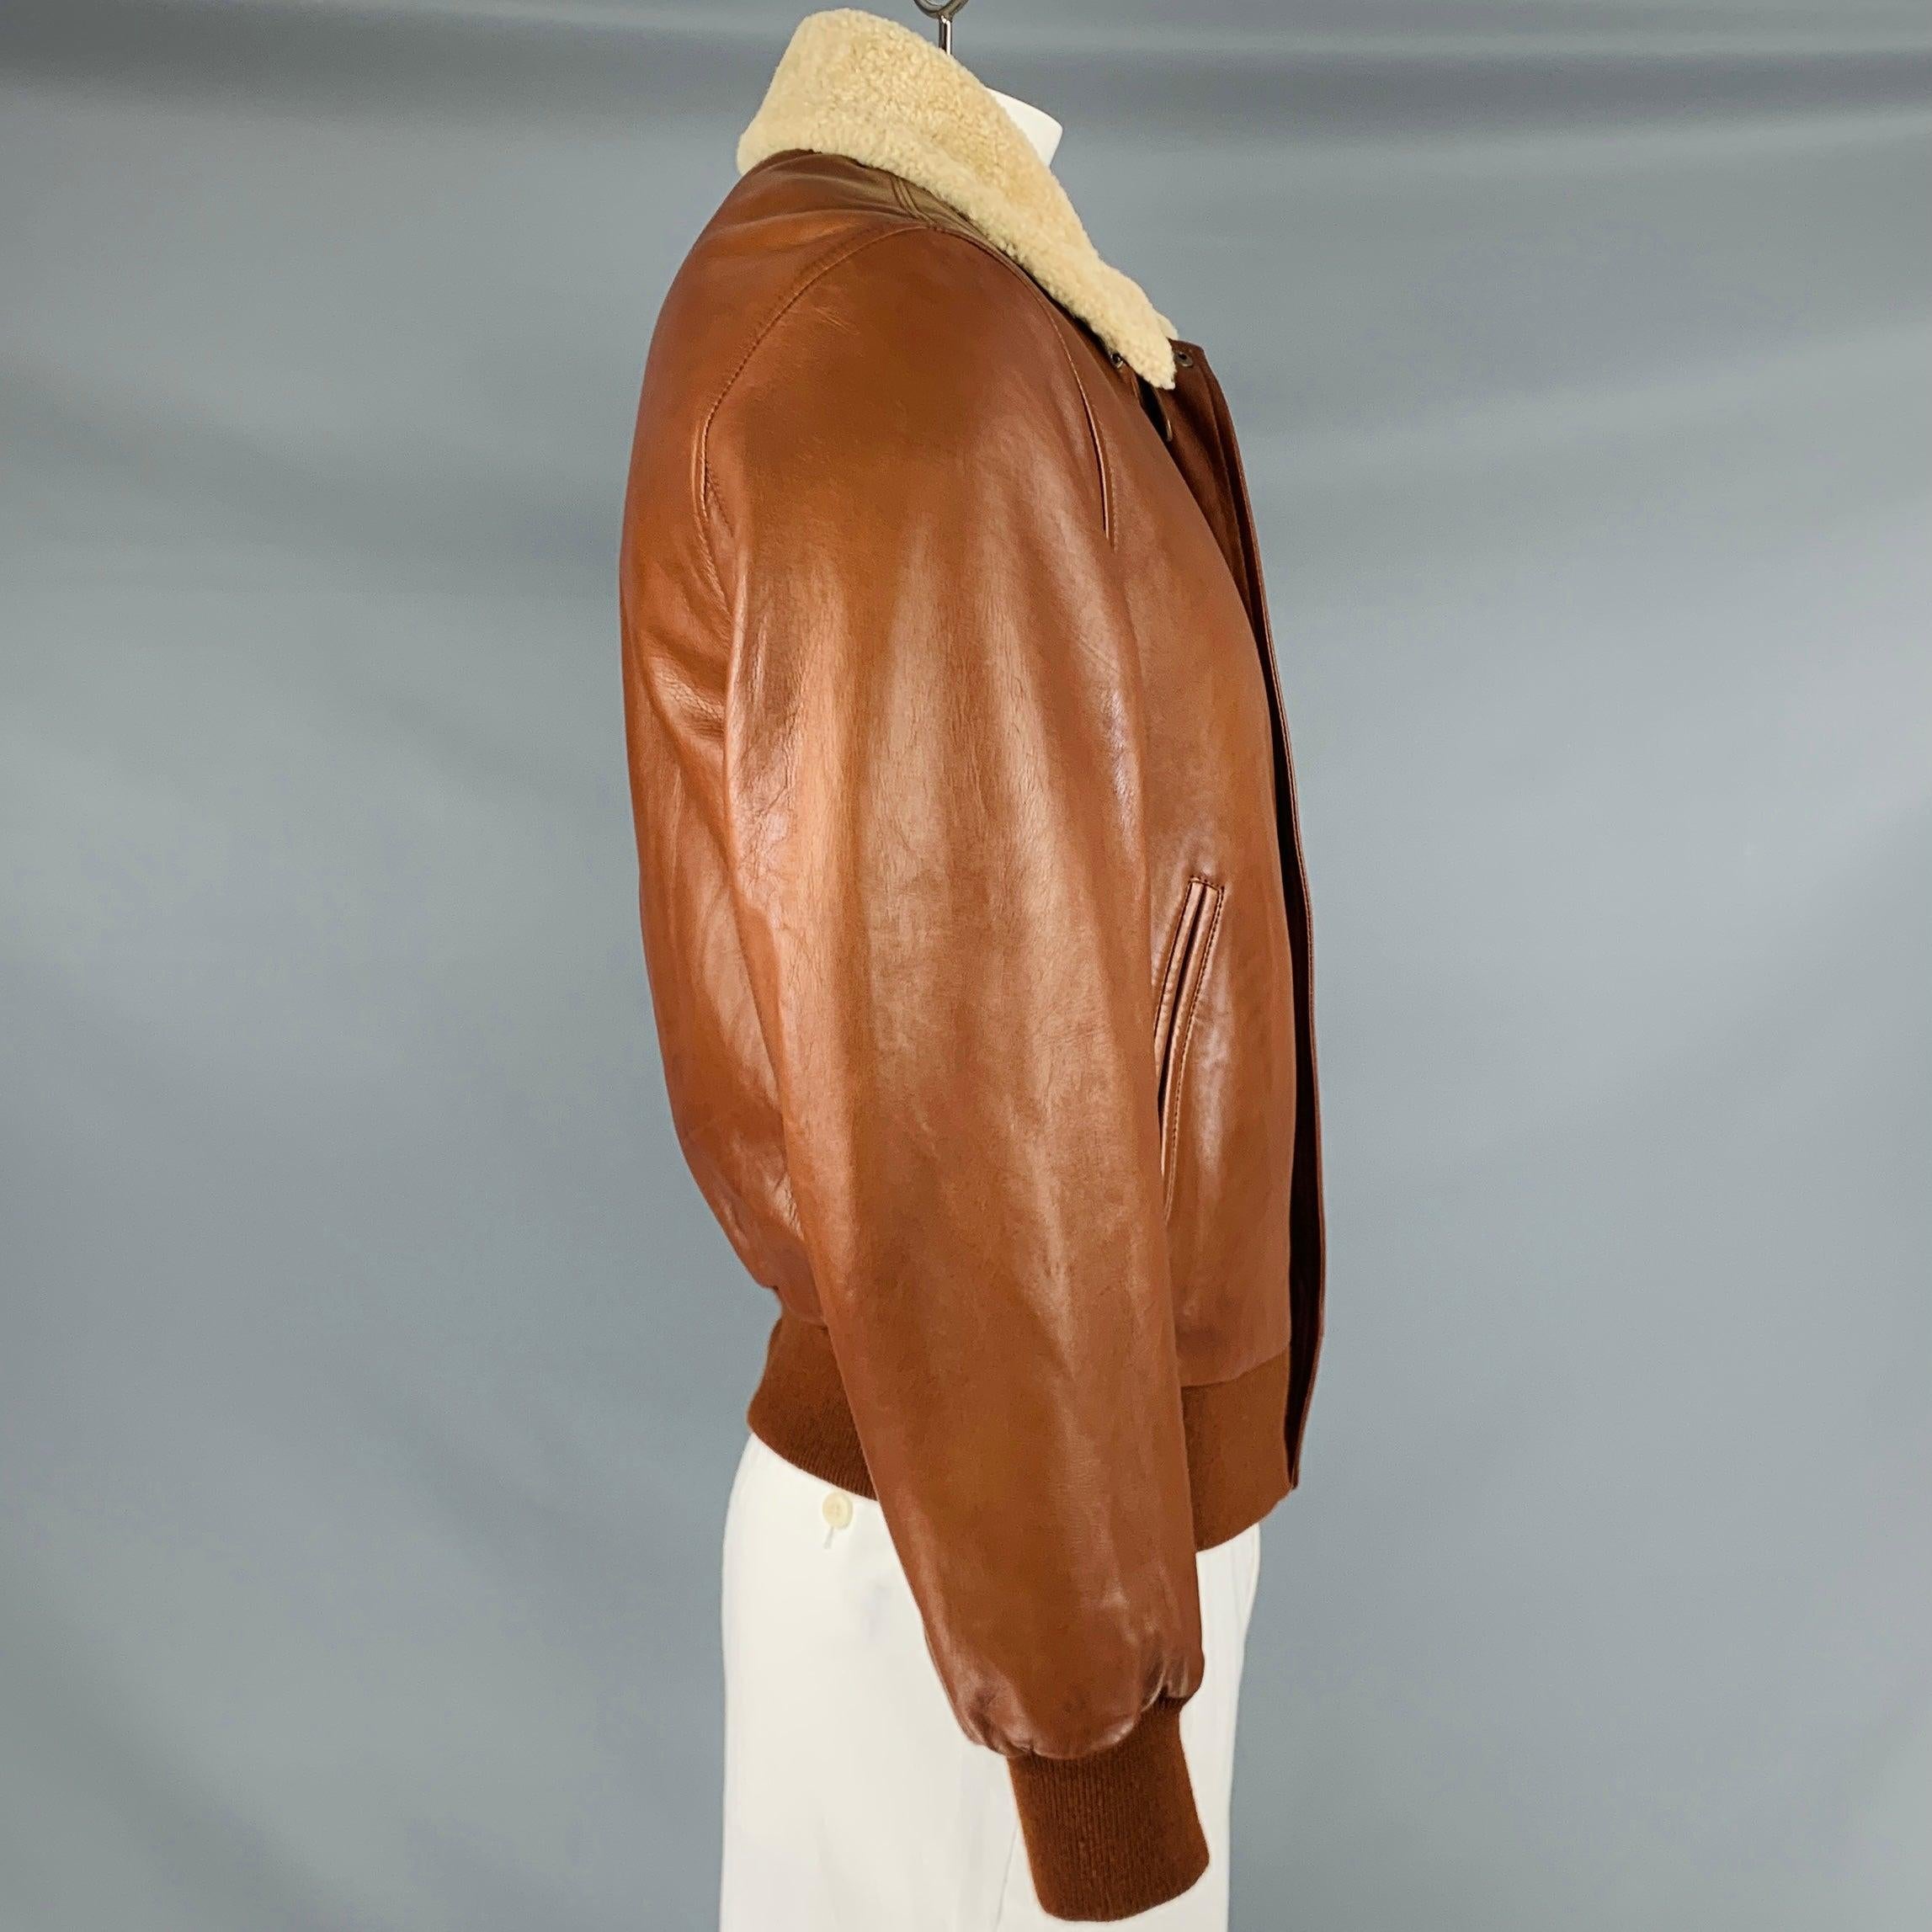 RALPH LAUREN PURPLE LABEL jacket
in a soft brown lambskin leather fabric featuring shearling collar, three pockets, and zip up closure. Made in Italy.Very Good Pre-Owned Condition. Minor signs of wear. 

Marked:   L 

Measurements: 
 
Shoulder: 17